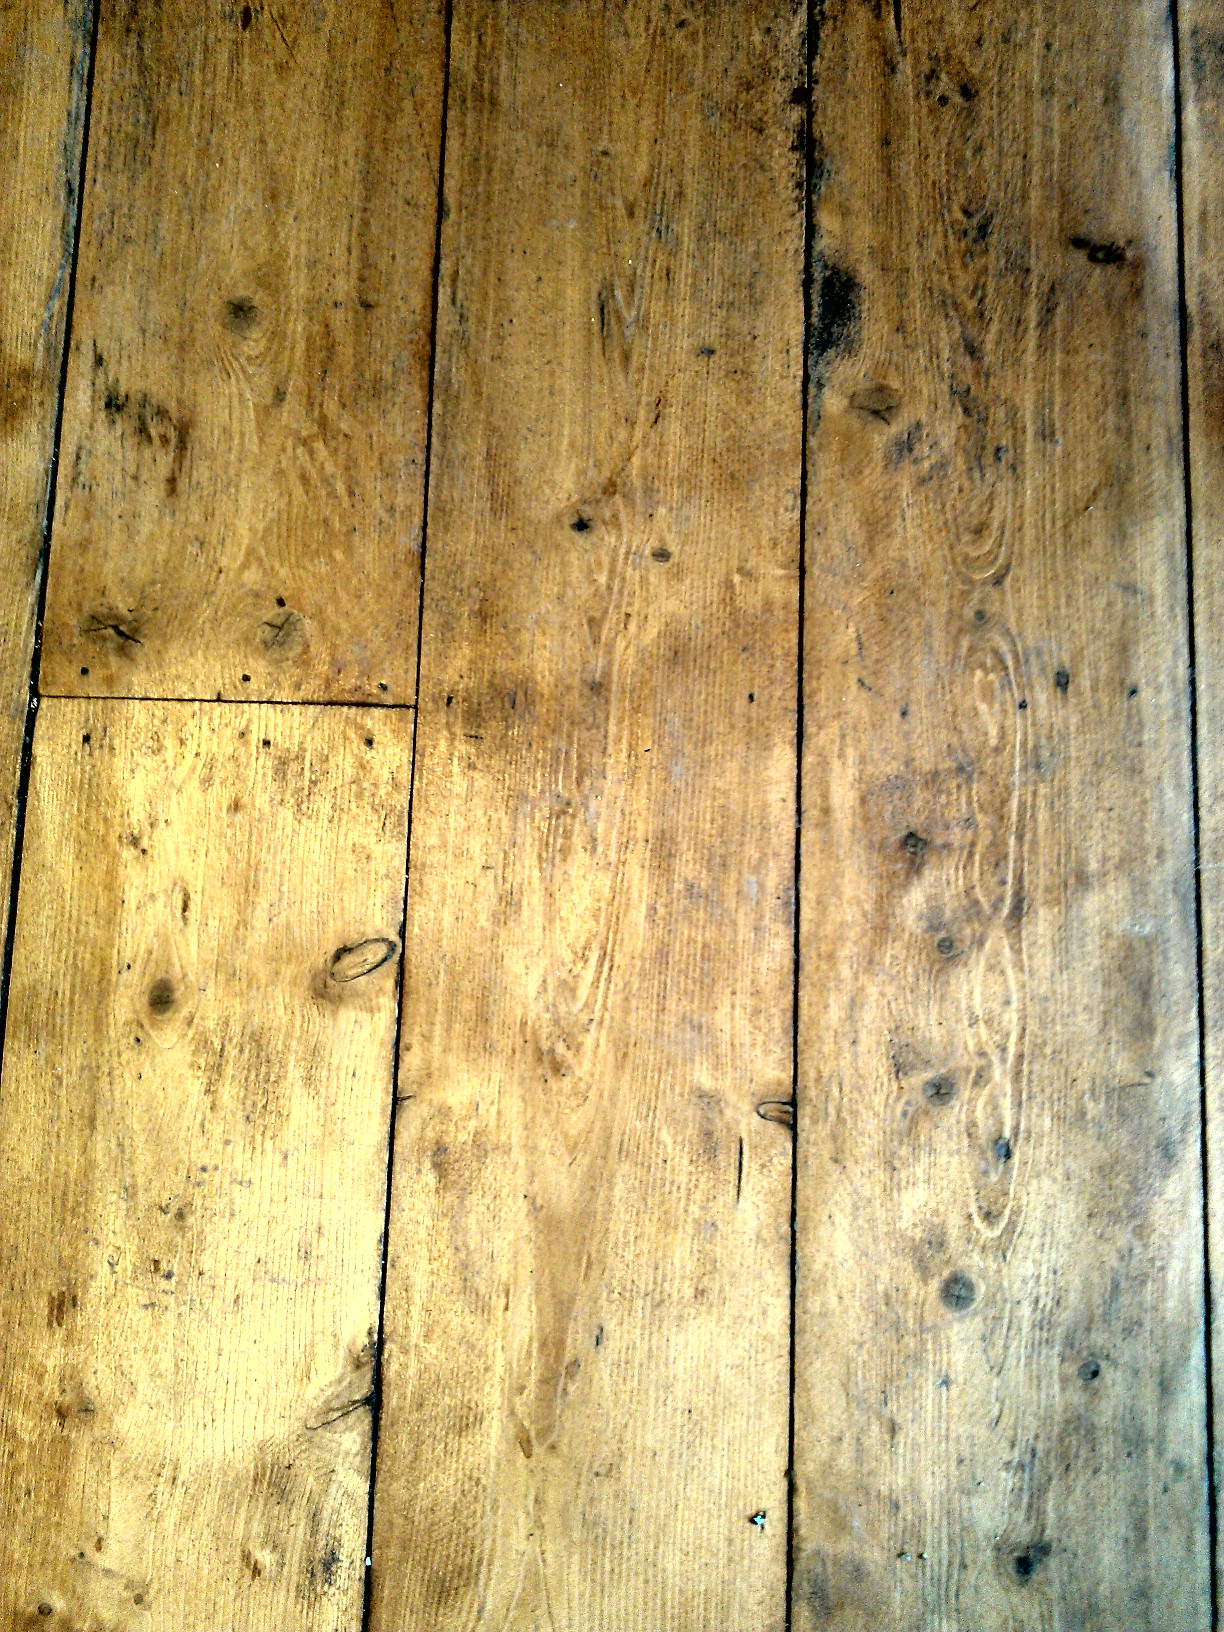 an old, worn, wooden floor with lots of s in it